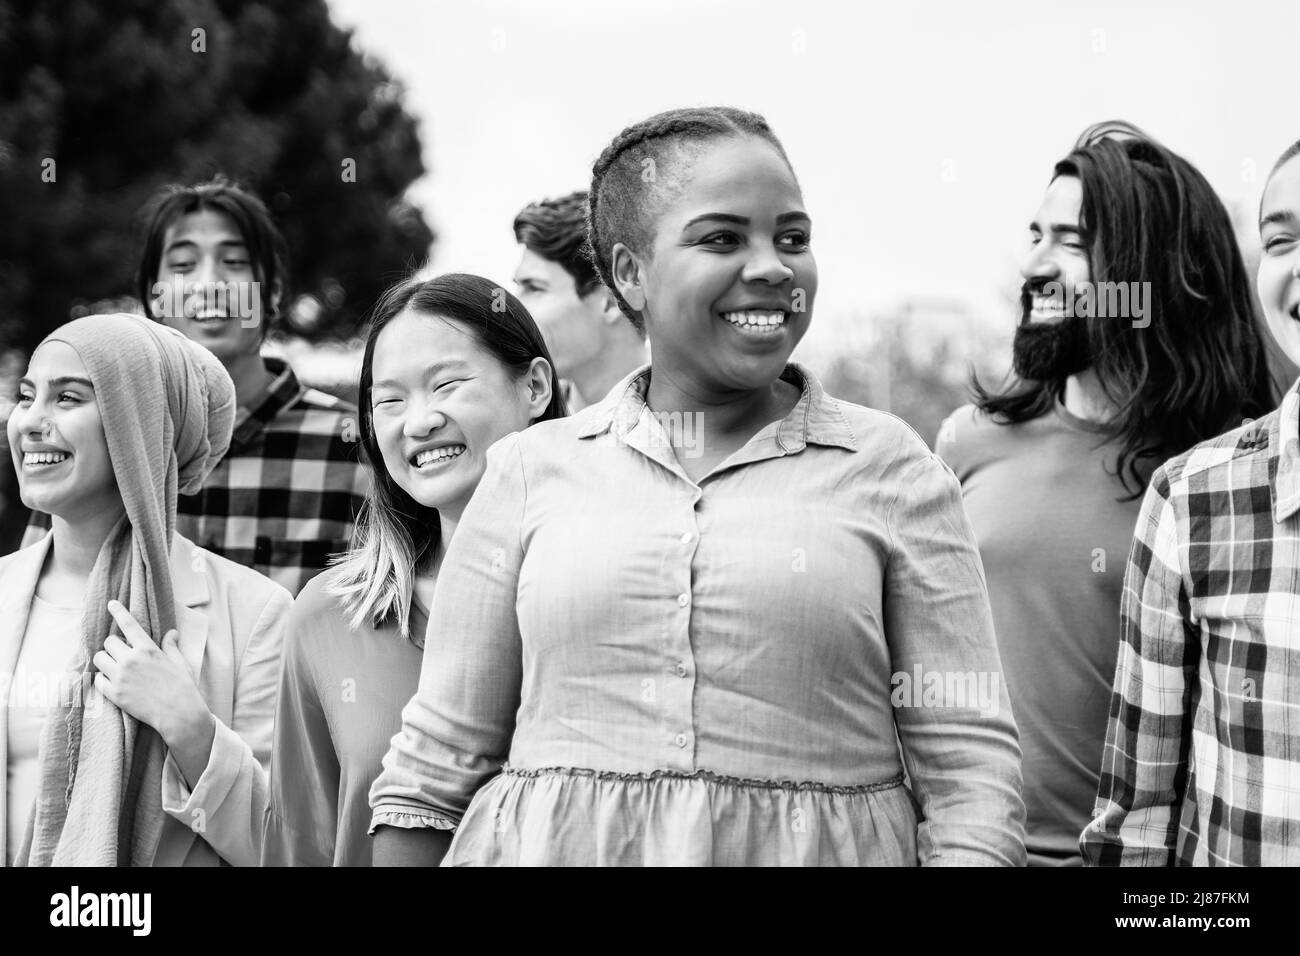 Multiethnic young people having fun walking together outdoor - Focus on Asian girl face - Black and white editing Stock Photo